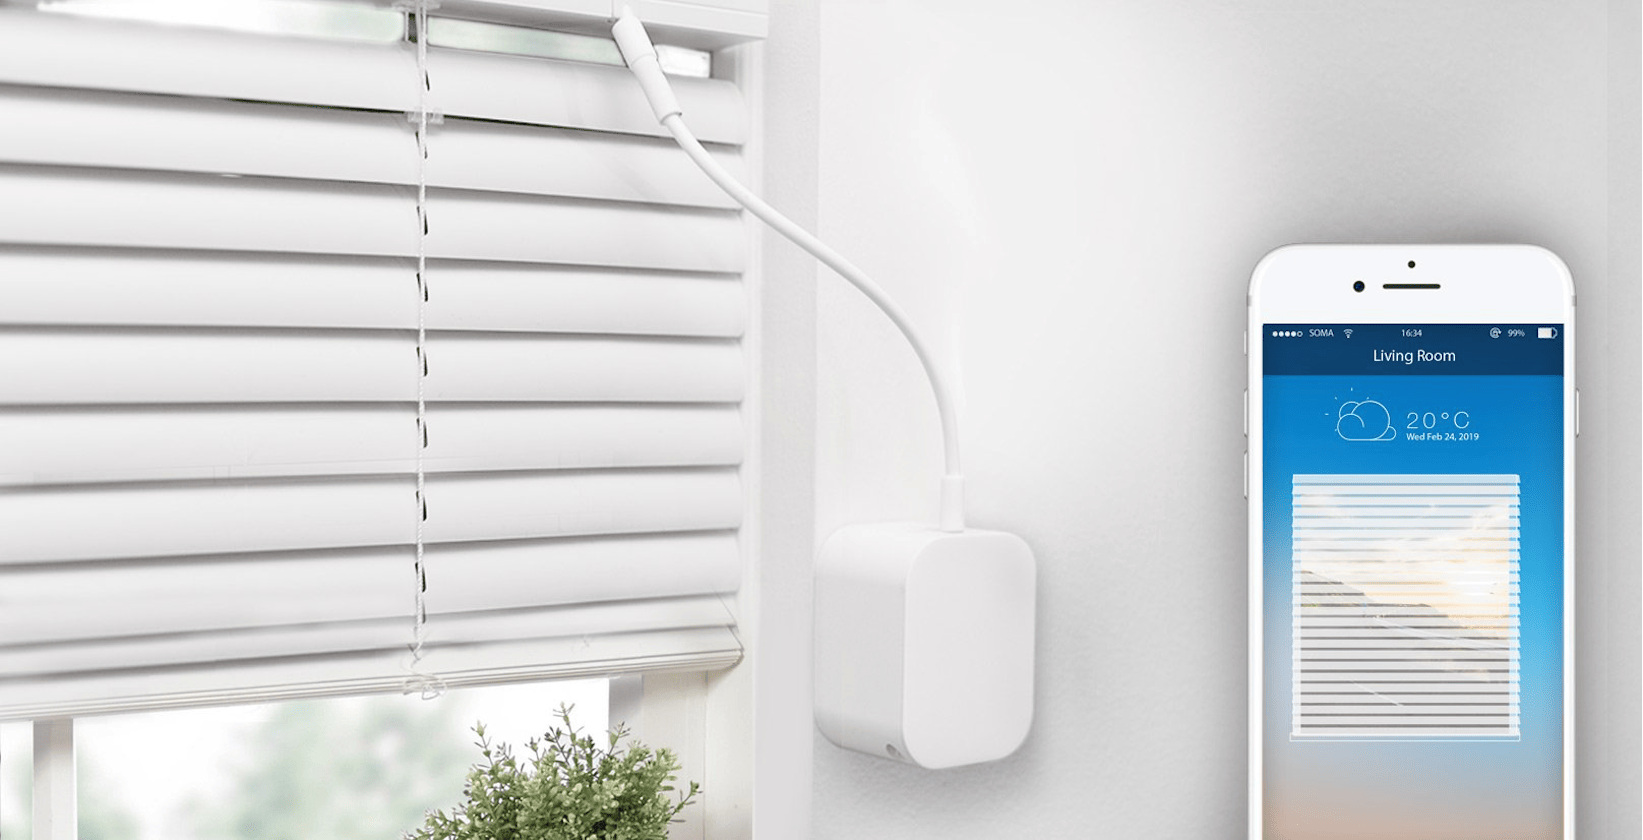 SOMA Tilt 2 installed on a window blind with mobile phone showing the Smart Shades app